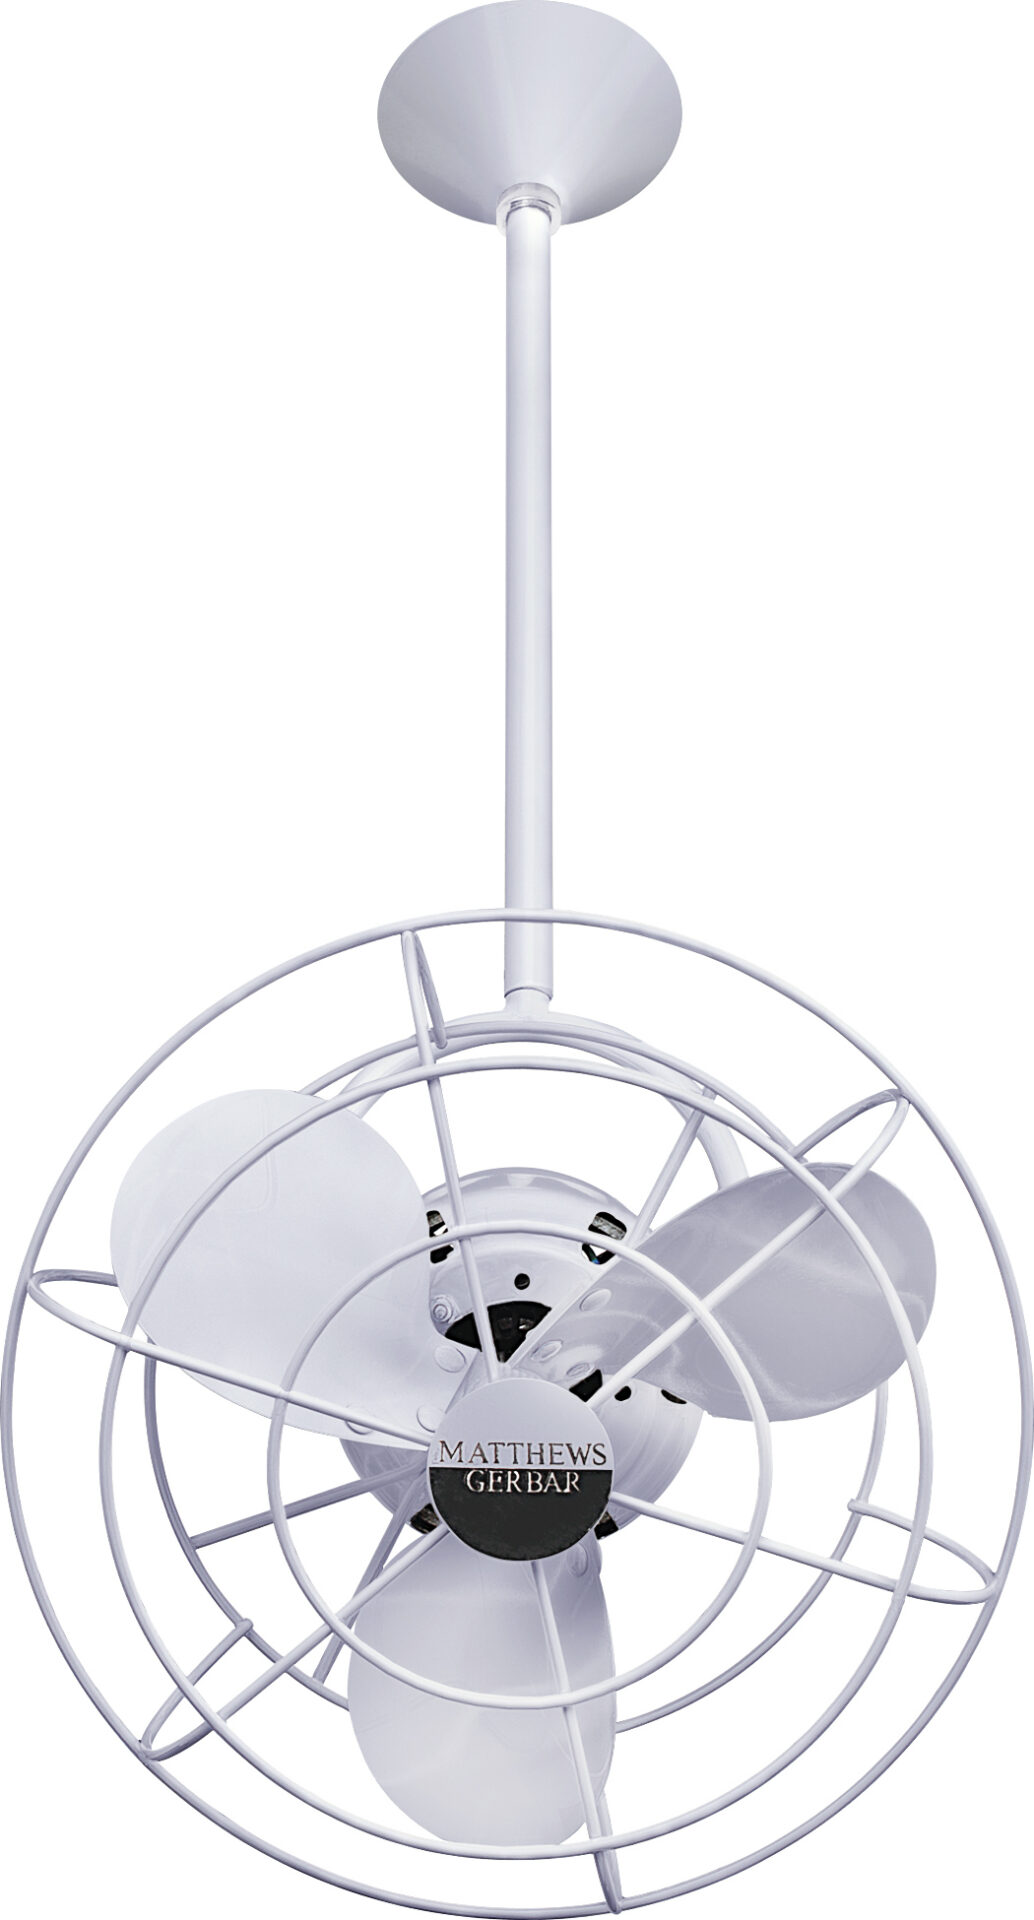 Bianca Direcional ceiling fan in Gloss White with metal blades and decorative cage made by Matthews Fan Company.